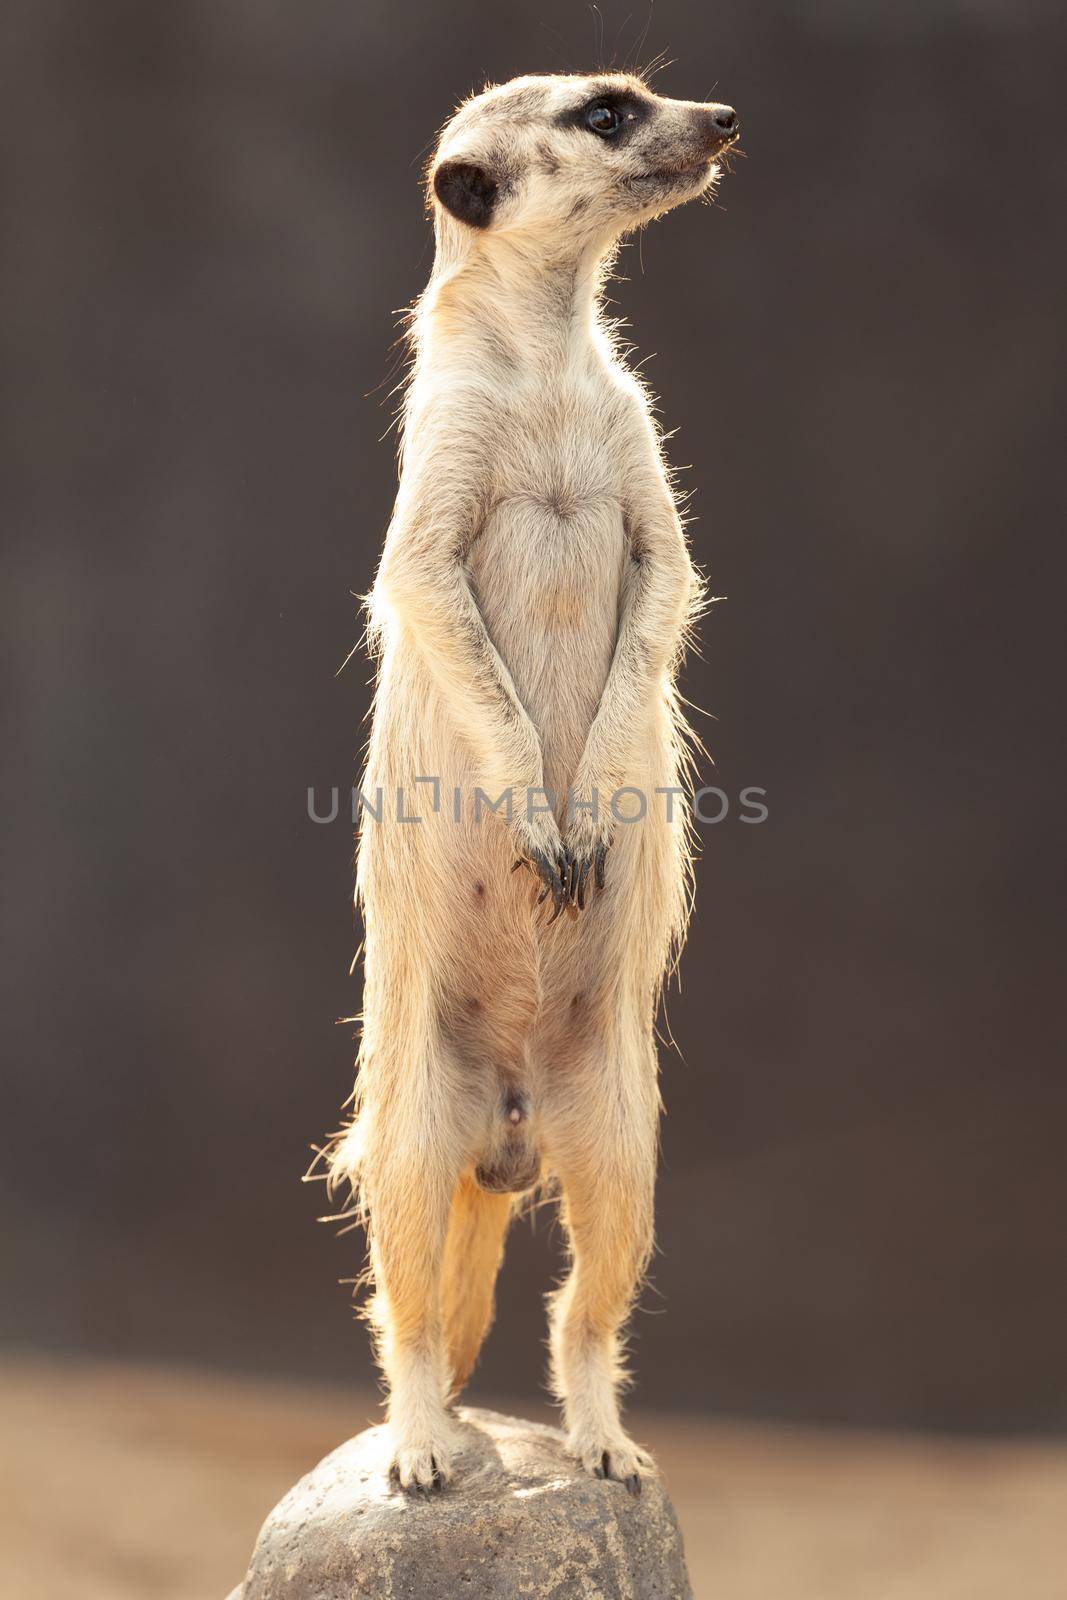 A family of meerkats fears an attack from air predators by gordiza